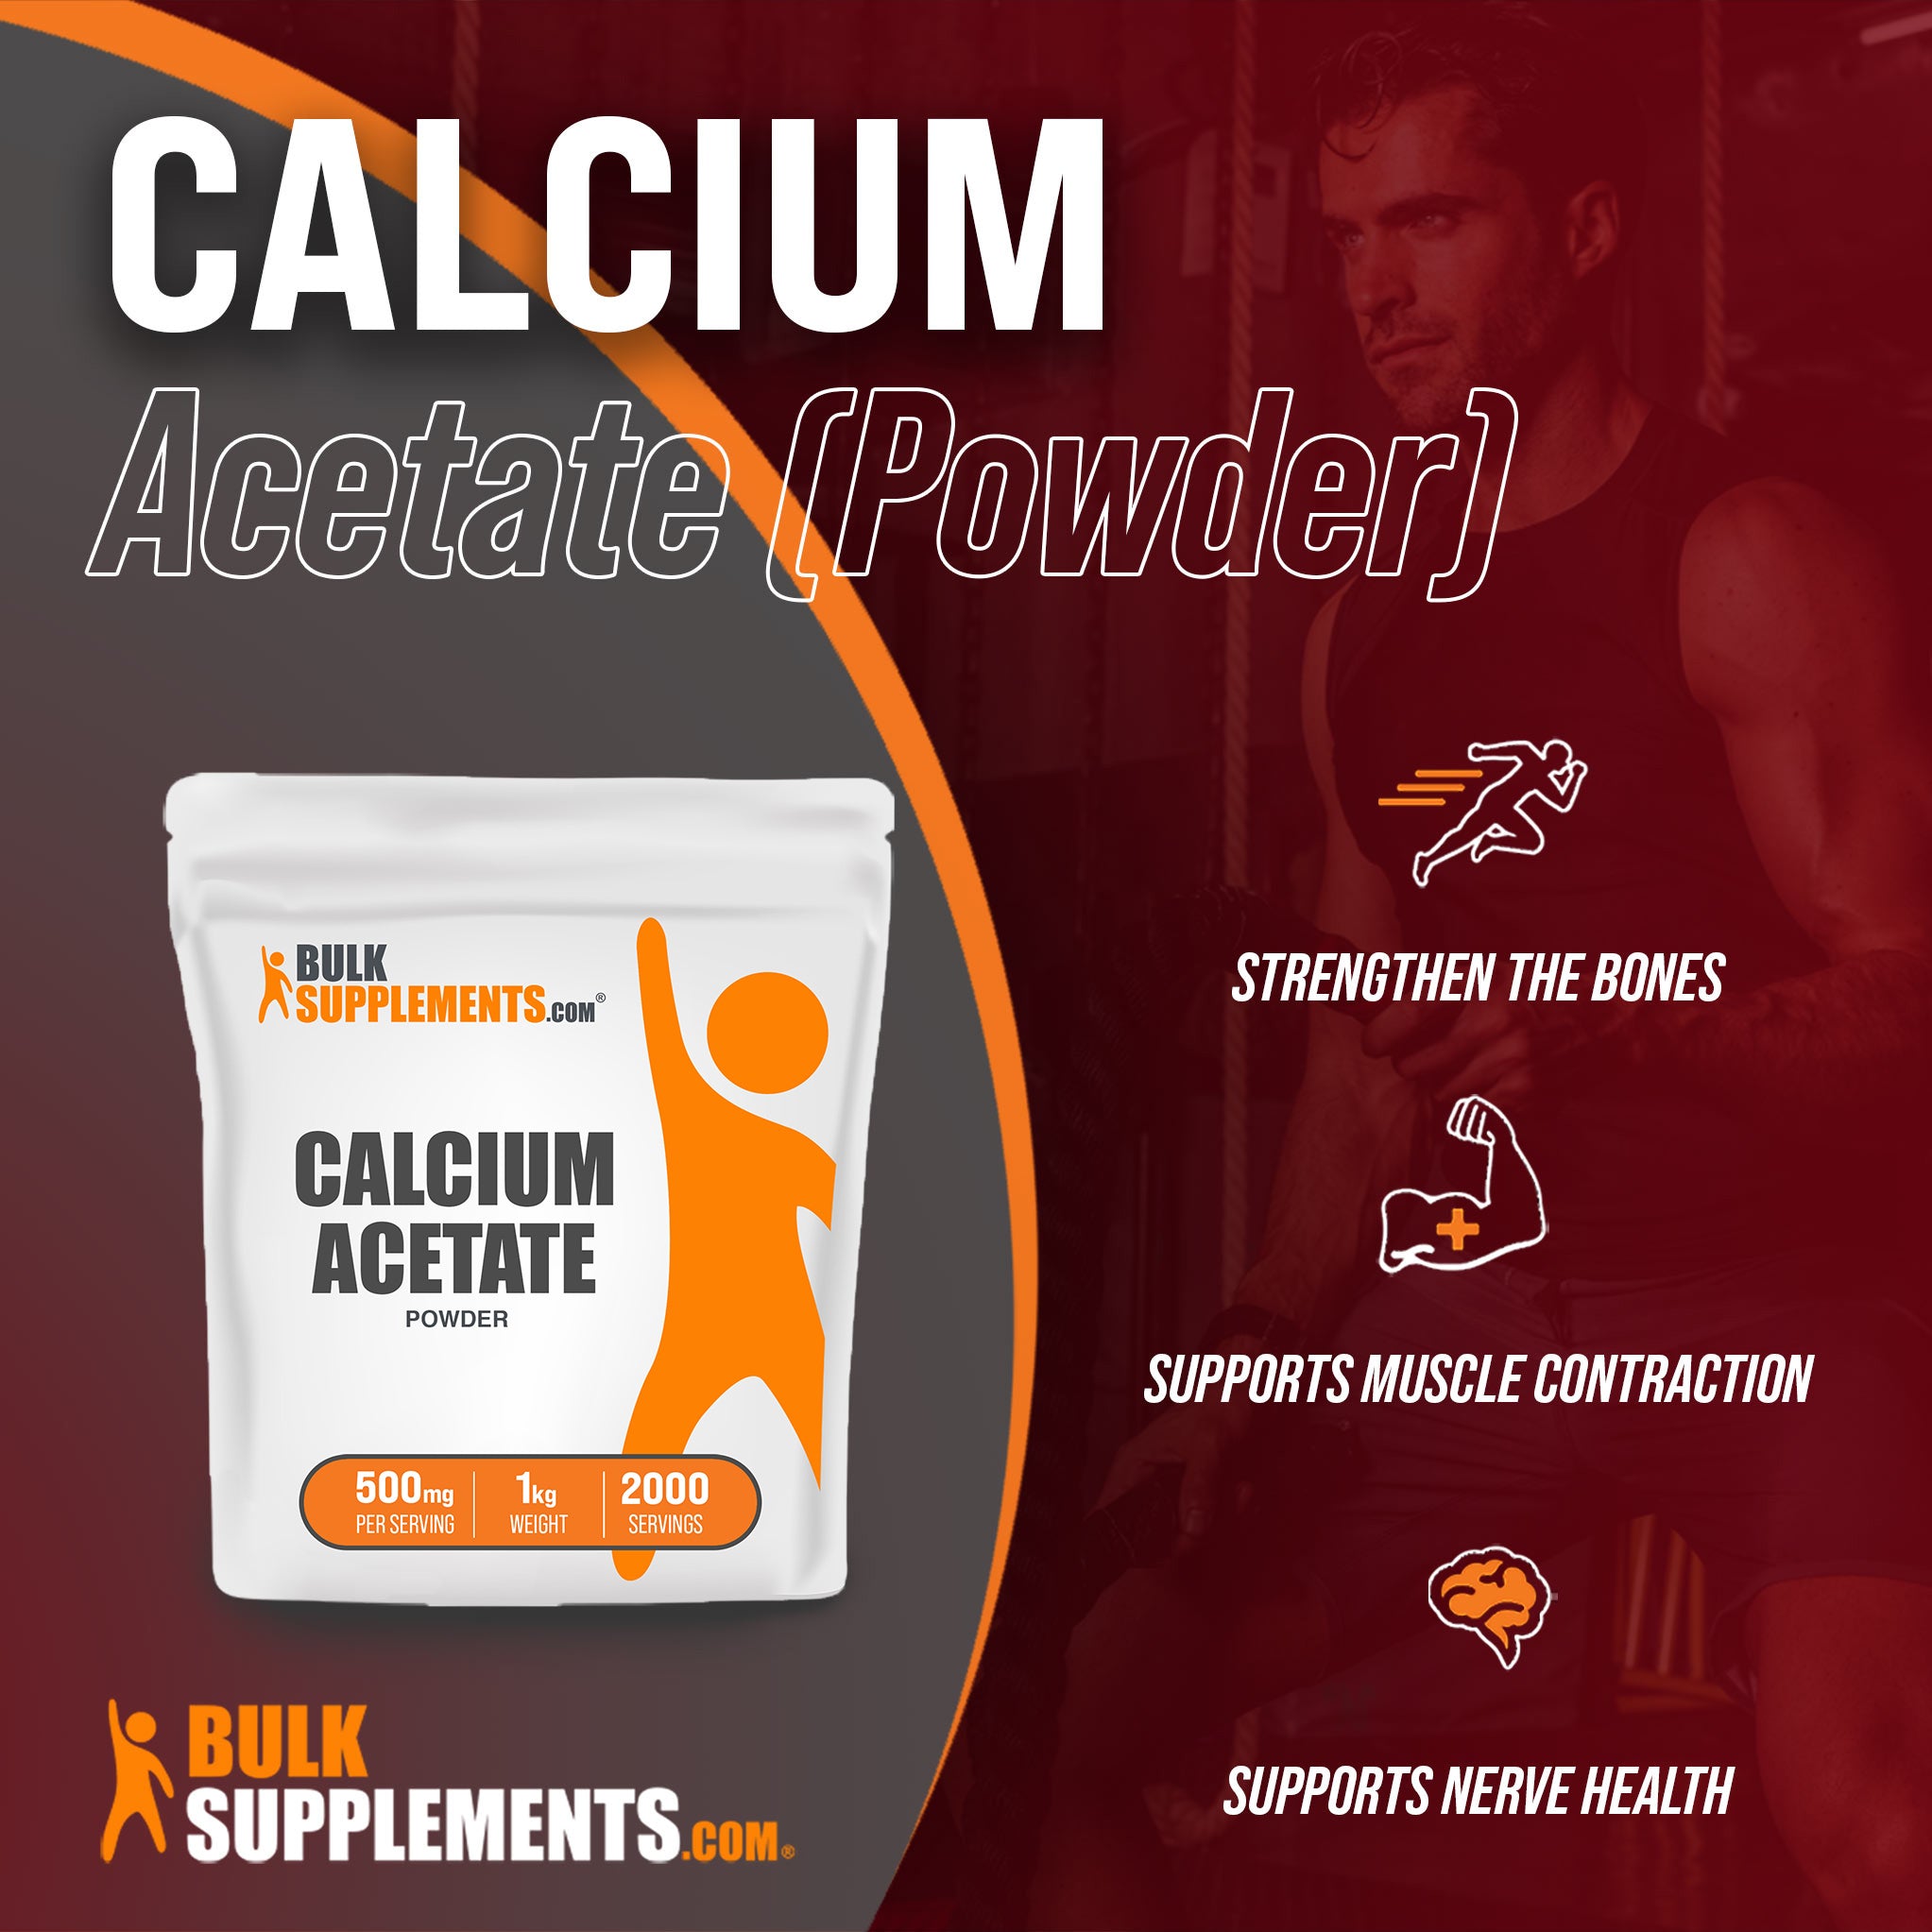 Benefits of our 1kg Calcium Supplement; strengthens the bones, supports muscle contraction, supports nerve health